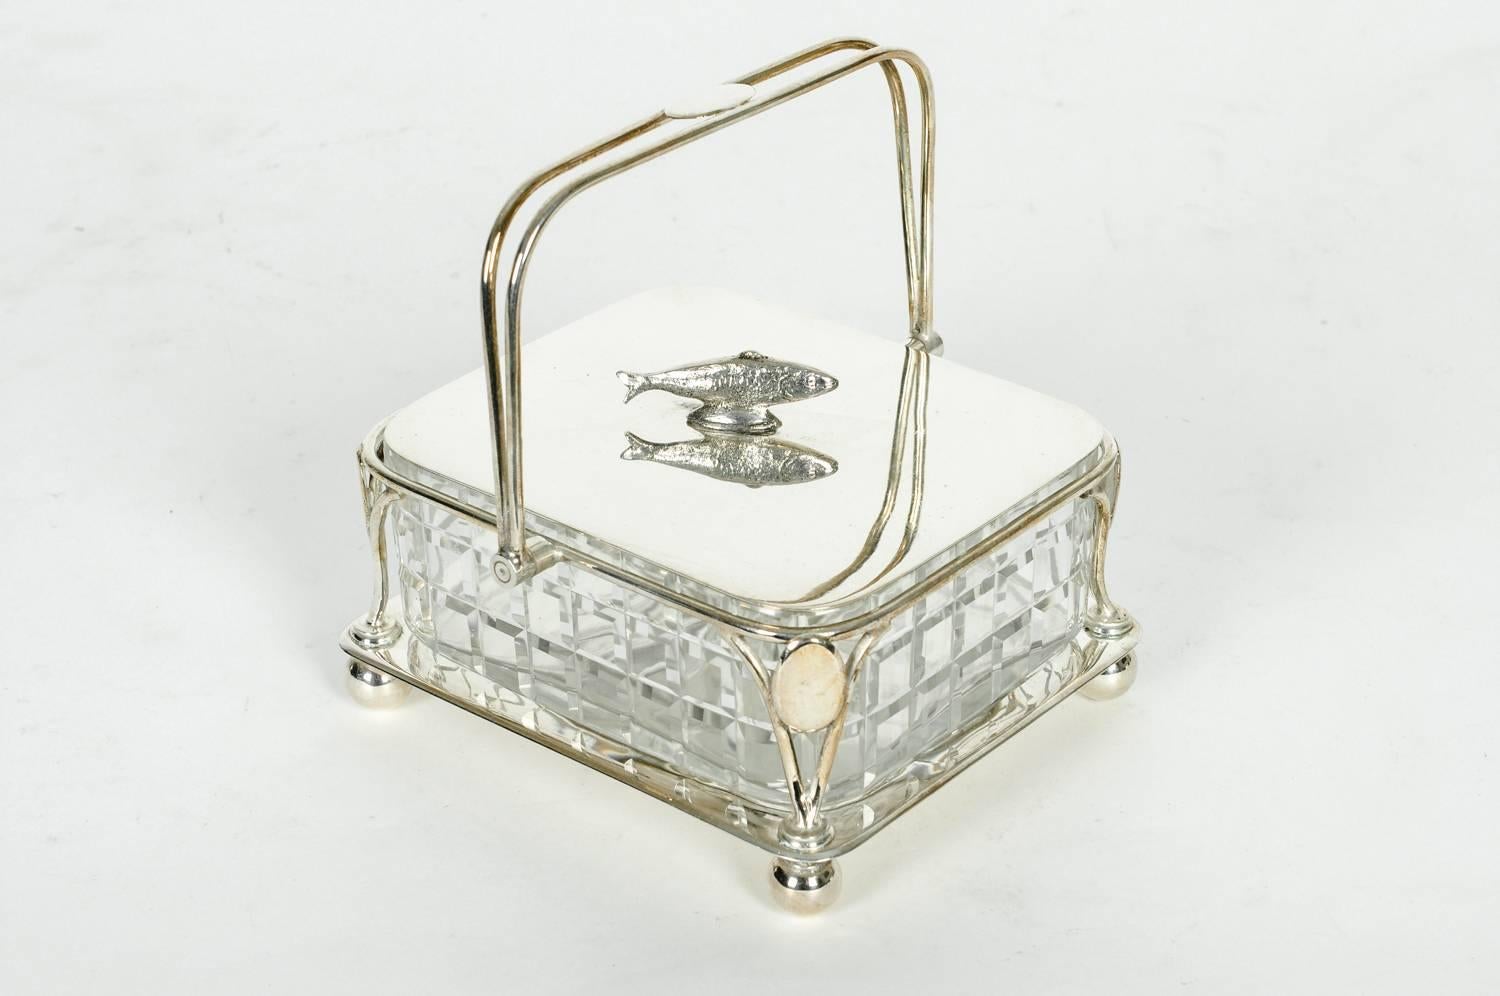 Great Britain (UK) Old English Silver Plated Holder or Cut Crystal Caviar Dish